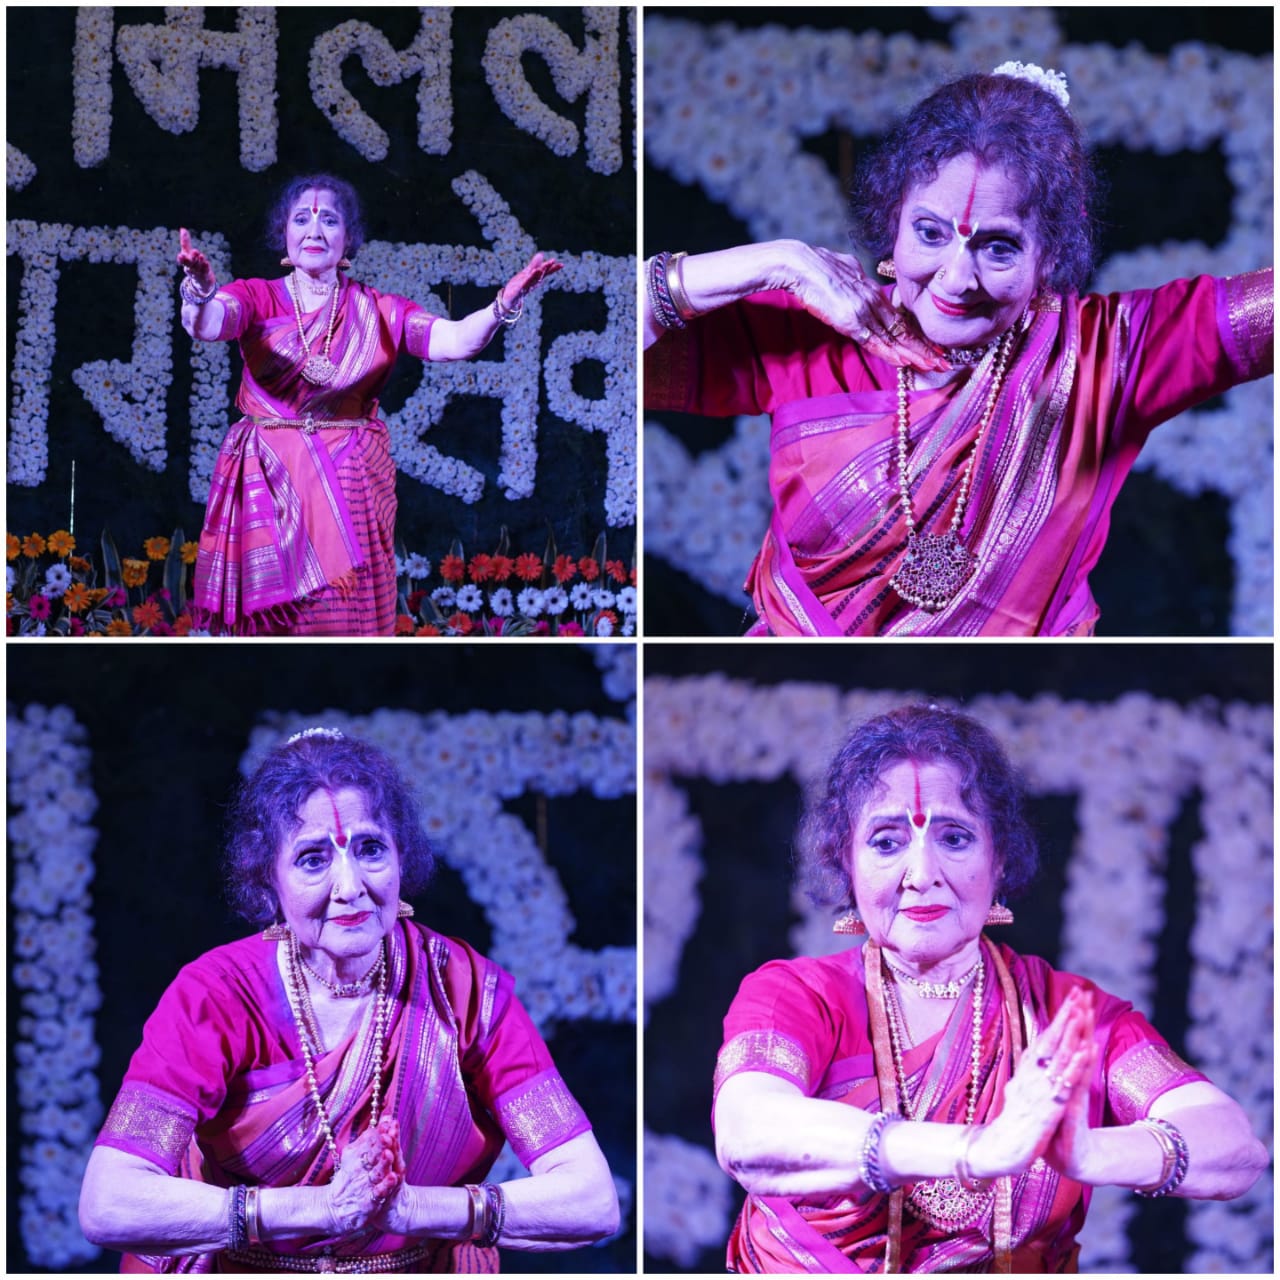 Vyajayanthimala Bali, the legendary actor does an age-defying performance at 90, at the Ayodhya temple